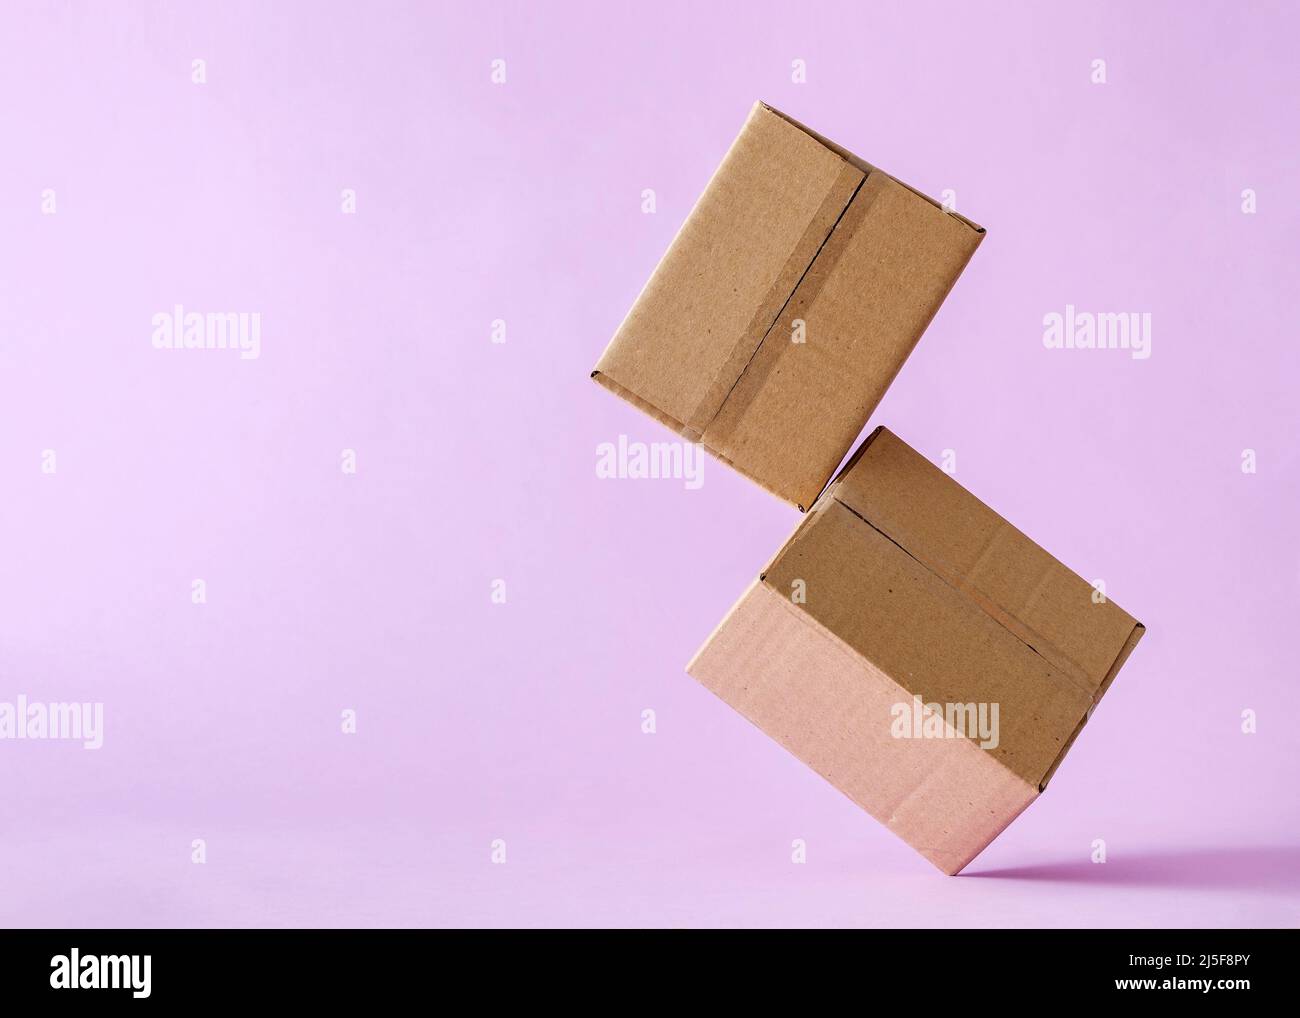 Cardboard boxes in levitation mail delivery and logistics concept. Stock Photo